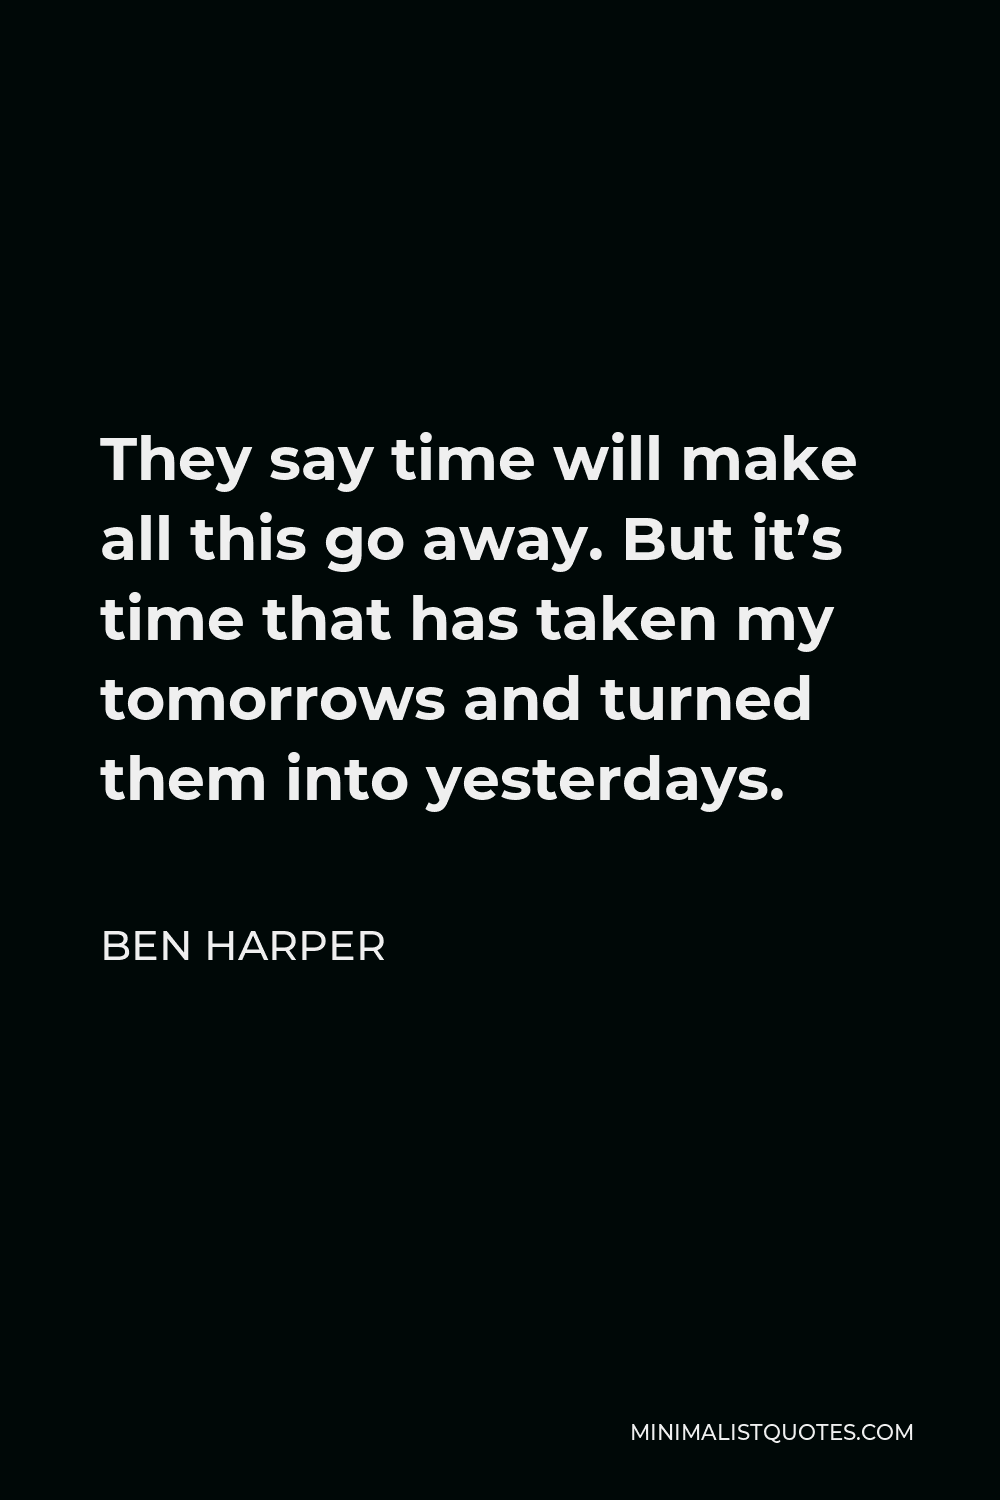 Ben Harper Quote - They say time will make all this go away. But it’s time that has taken my tomorrows and turned them into yesterdays.